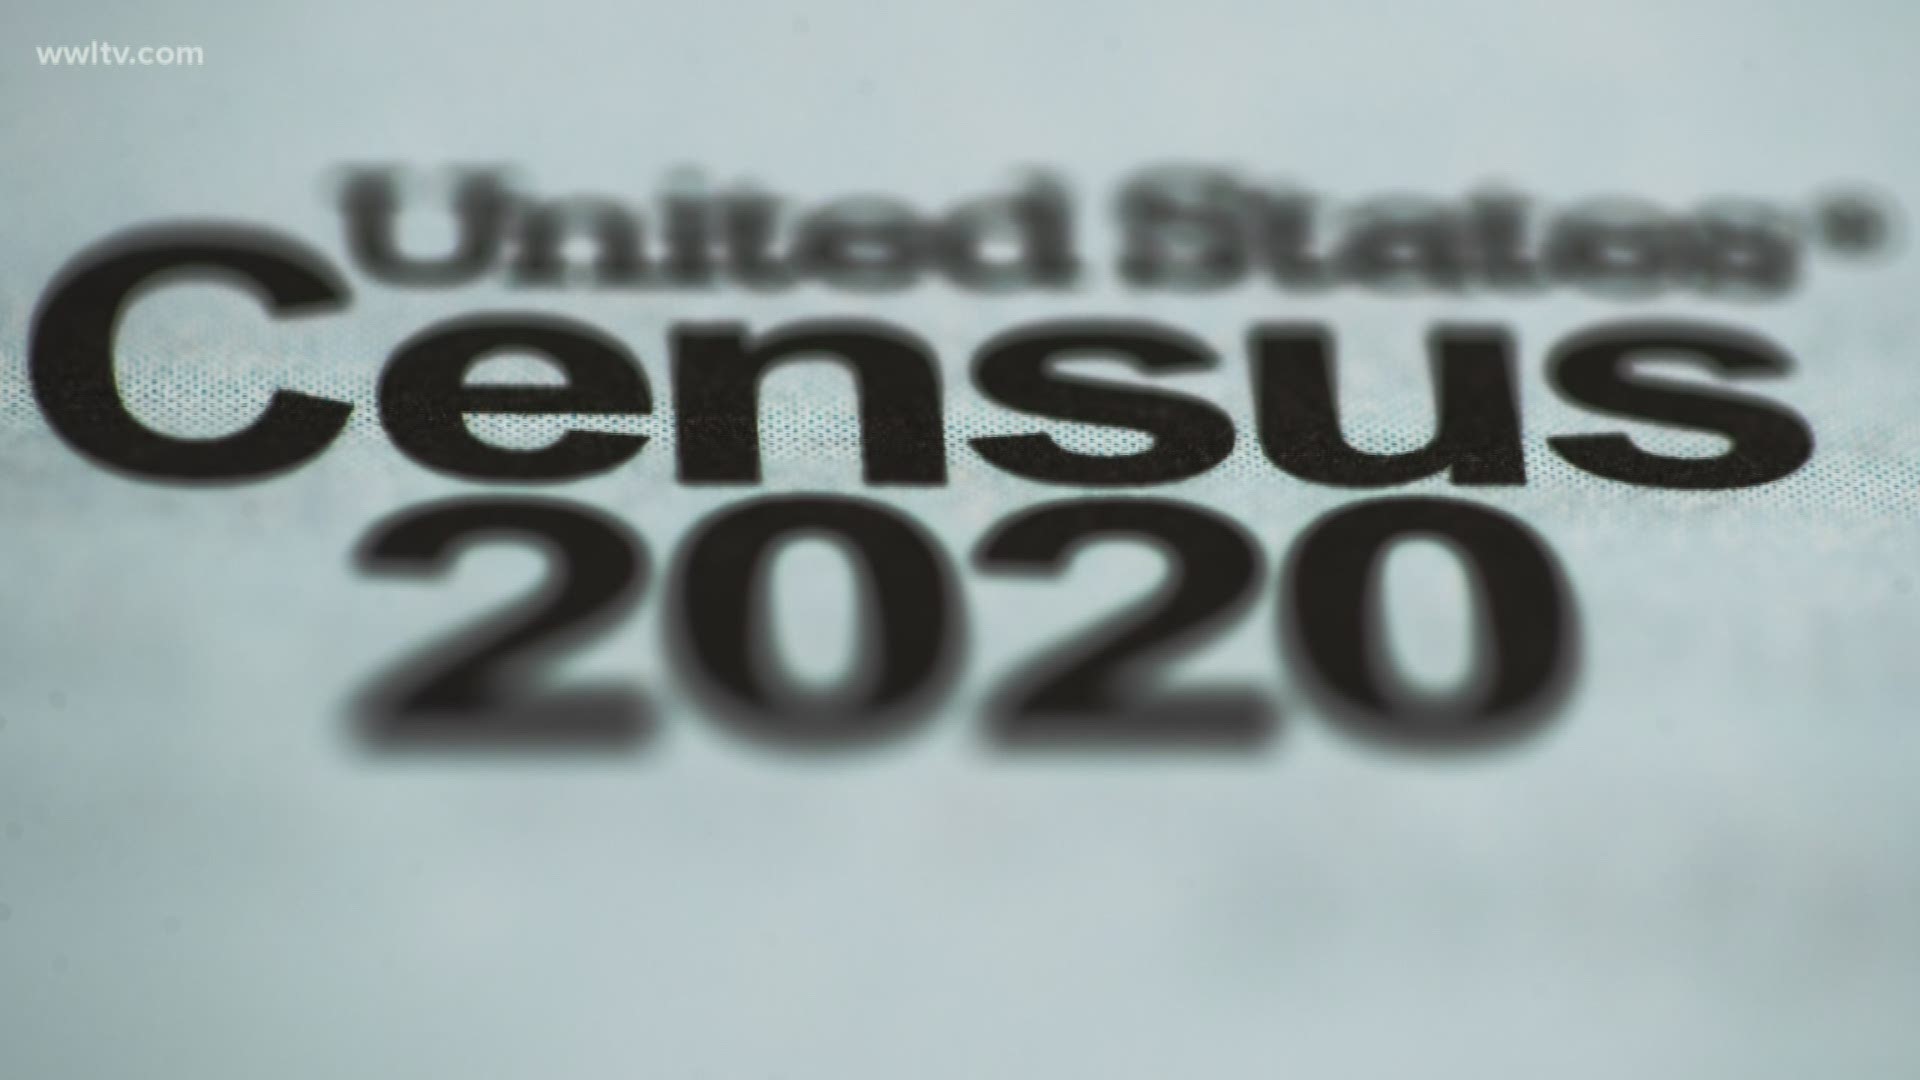 The Urban League of Louisiana encourages everyone to partipcate in the 2020 Census. It's the first census available online, making it possible during this pandemic.